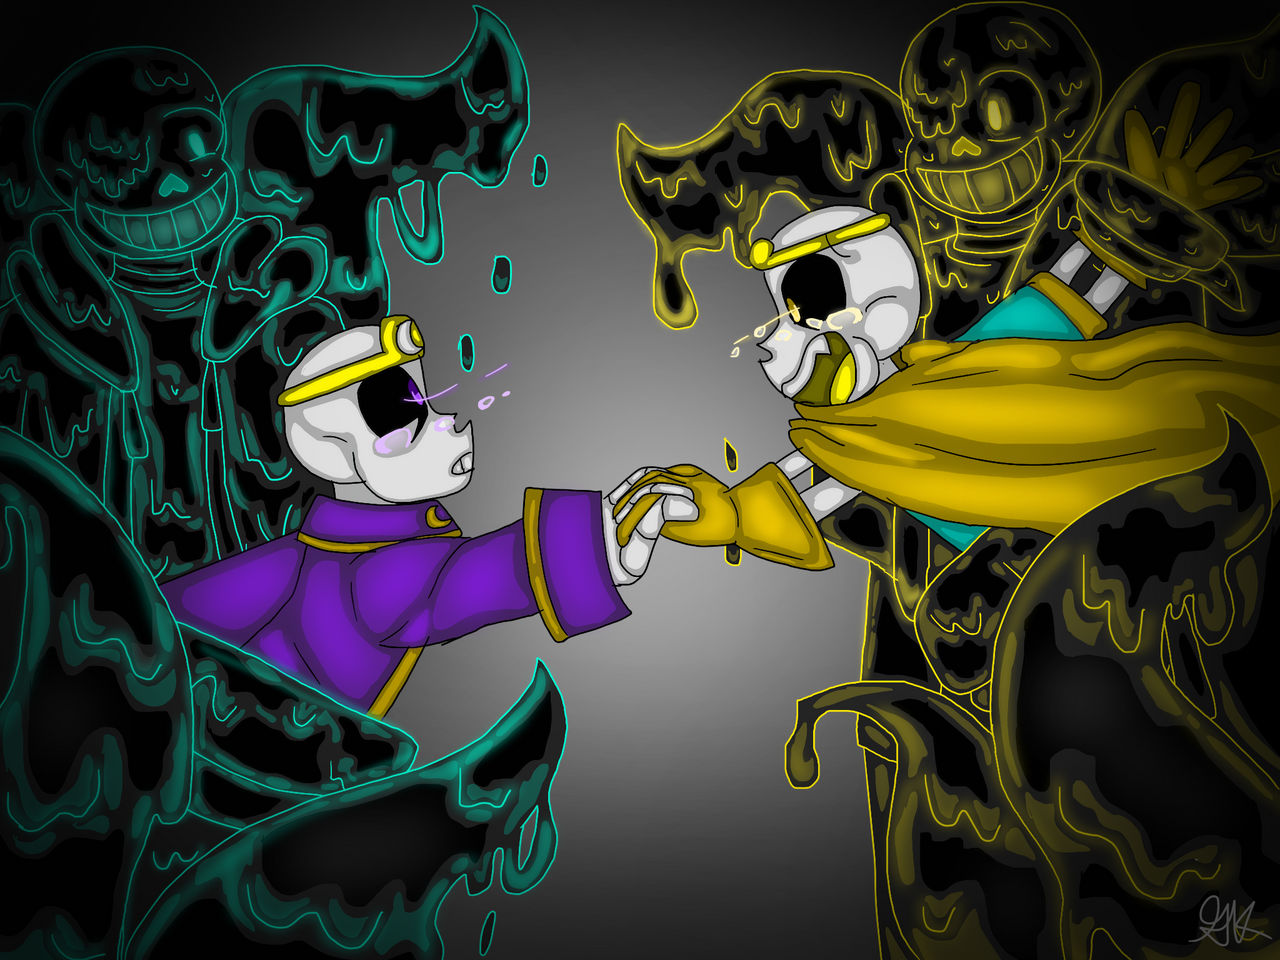 Dream and Nightmare Sans by Turcoil on DeviantArt